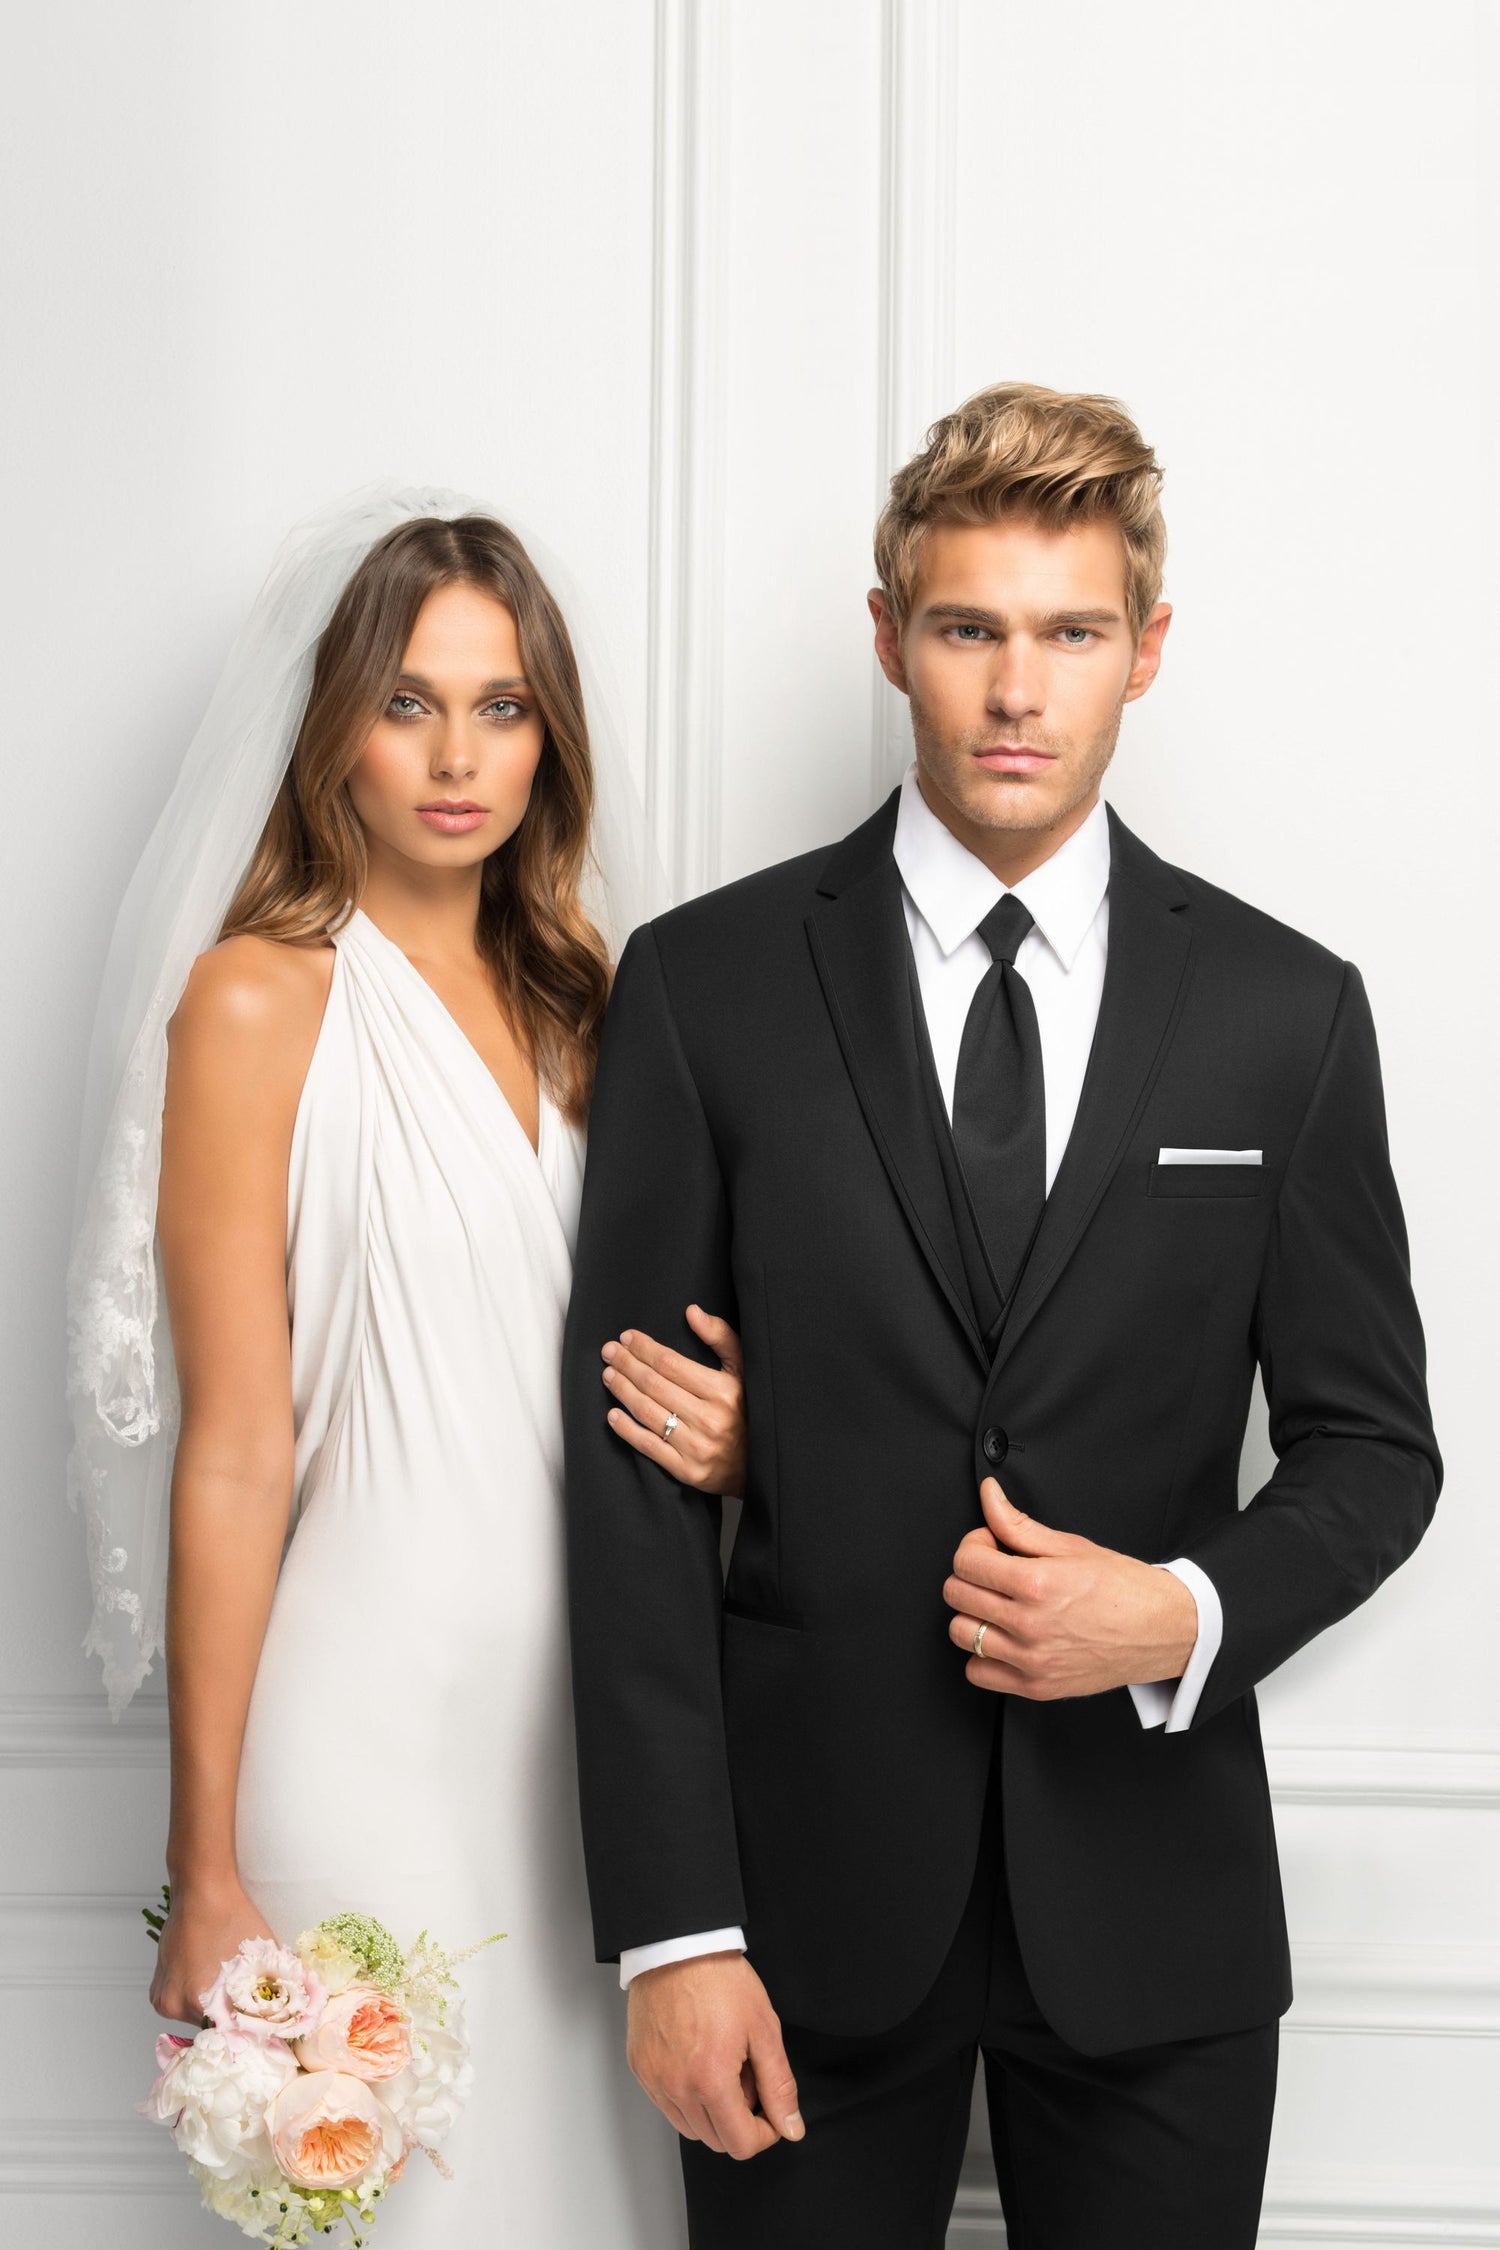 Bride and groom standing side by side in bridal gown and tuxedo